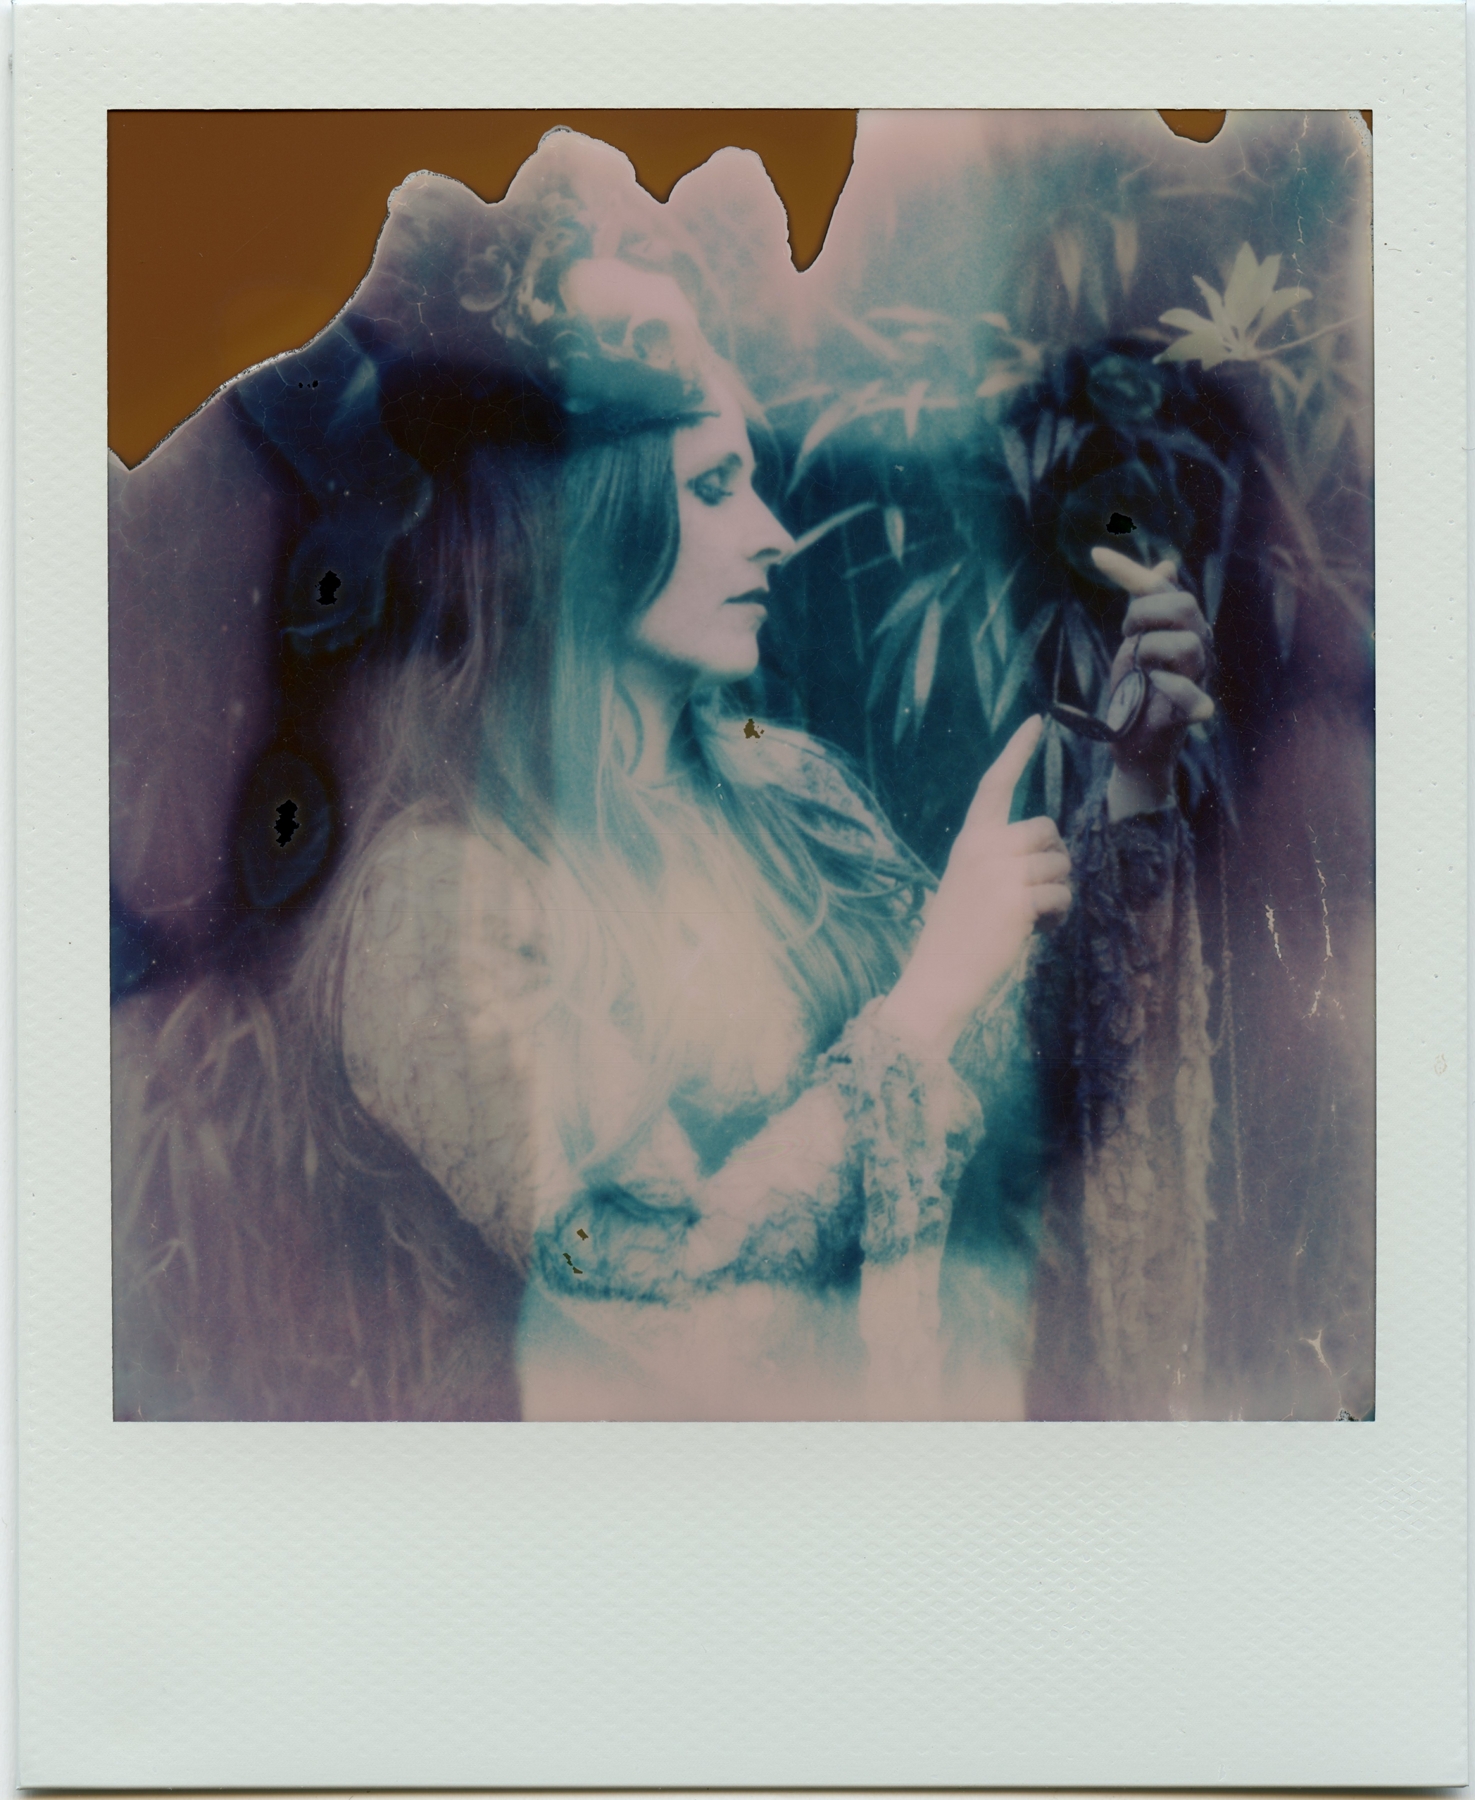 Lost In Time | Polaroid SLR680 | Impossible Project 600 Color Film | Julia Beyer